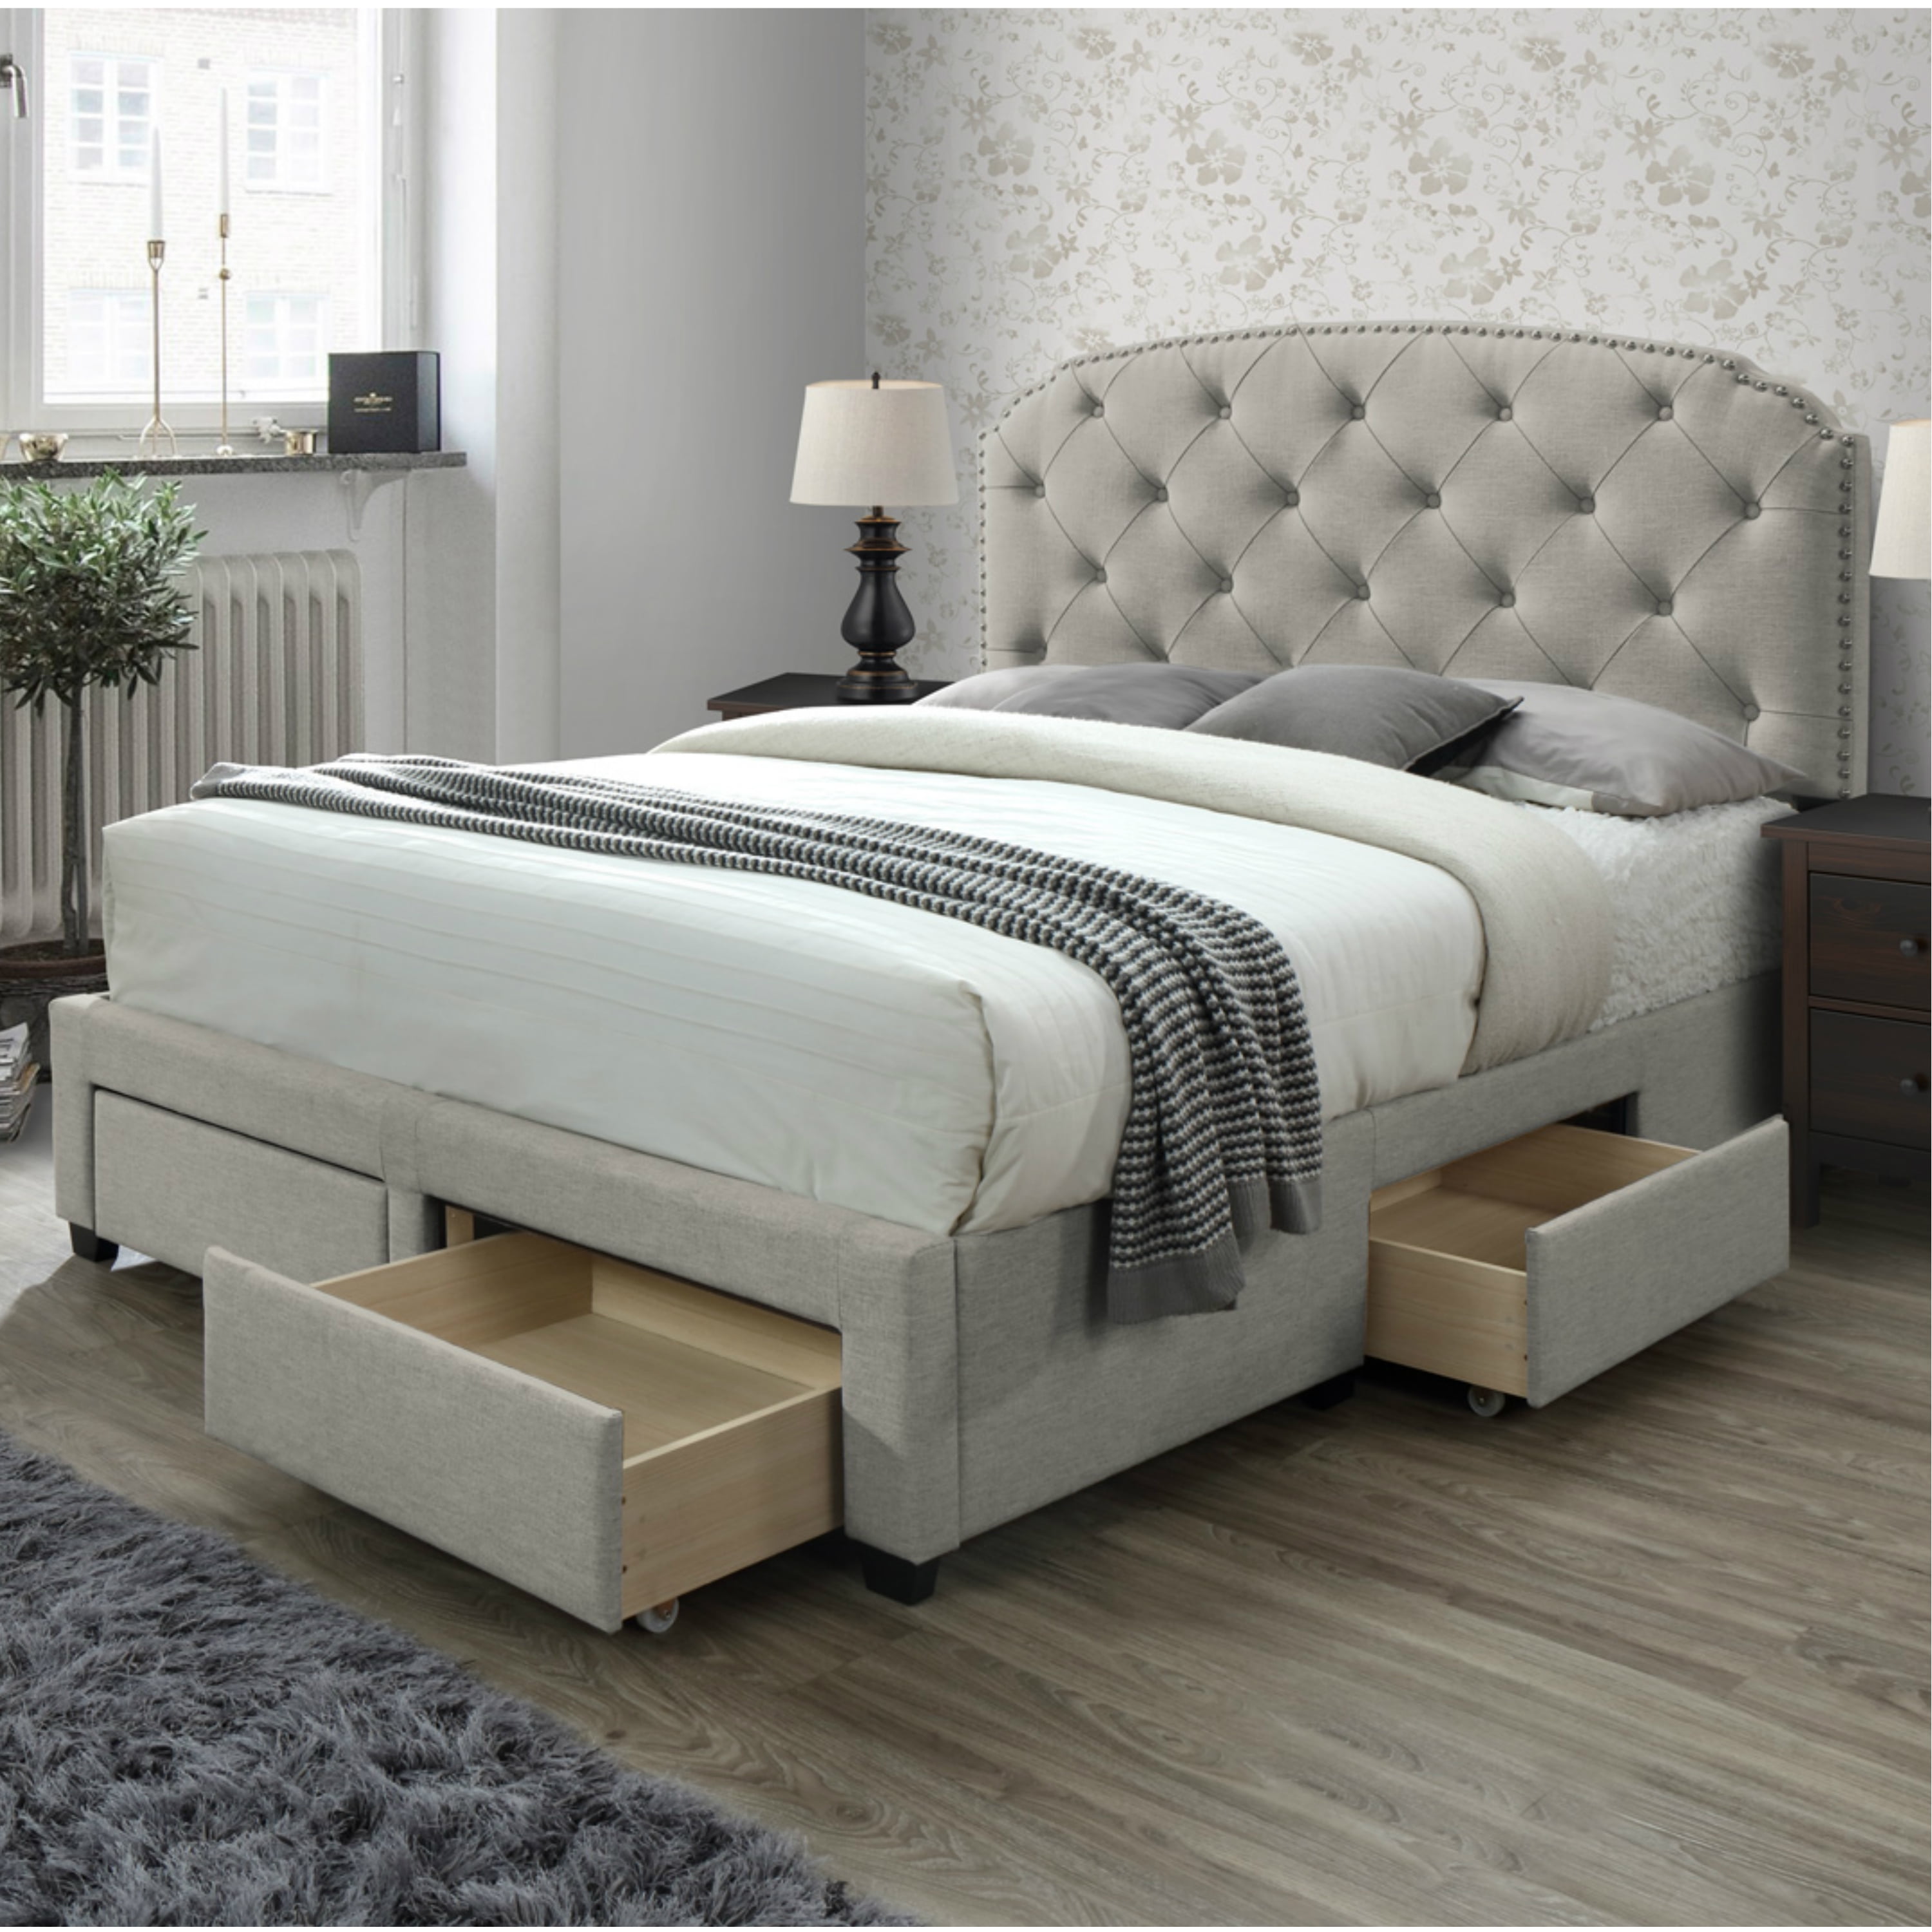 MODERN 4 DRAWERS STORAGE FABRIC BED FRAME DOUBLE OR KING SIZE BEDS MATTRESS 